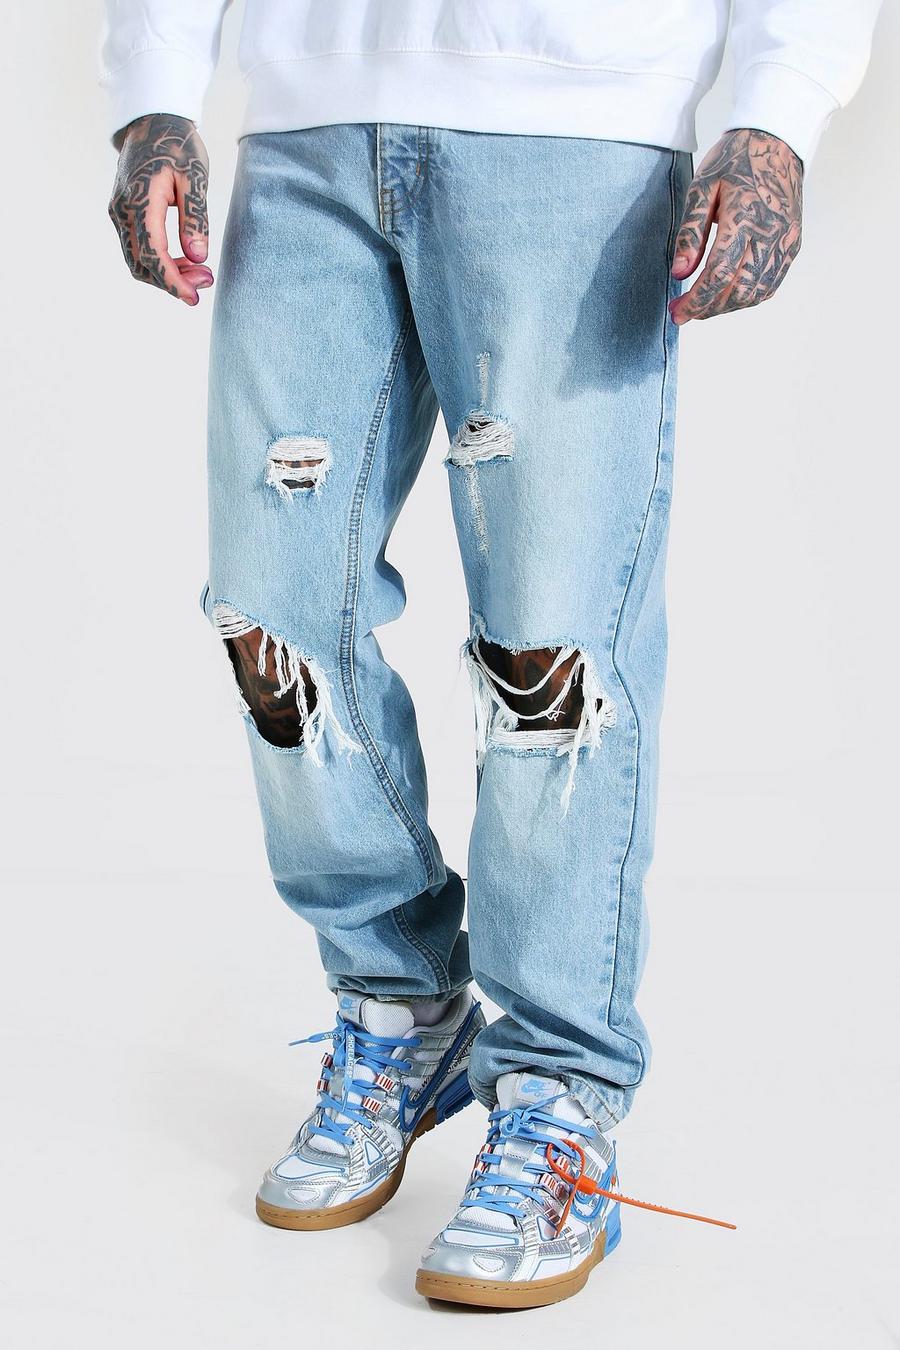 https://media.boohoo.com/i/boohoo/mzz02442_ice%20blue_xl/male-ice%20blue-relaxed-fit-distressed-jeans-with-busted-knee/?w=900&qlt=default&fmt.jp2.qlt=70&fmt=auto&sm=fit